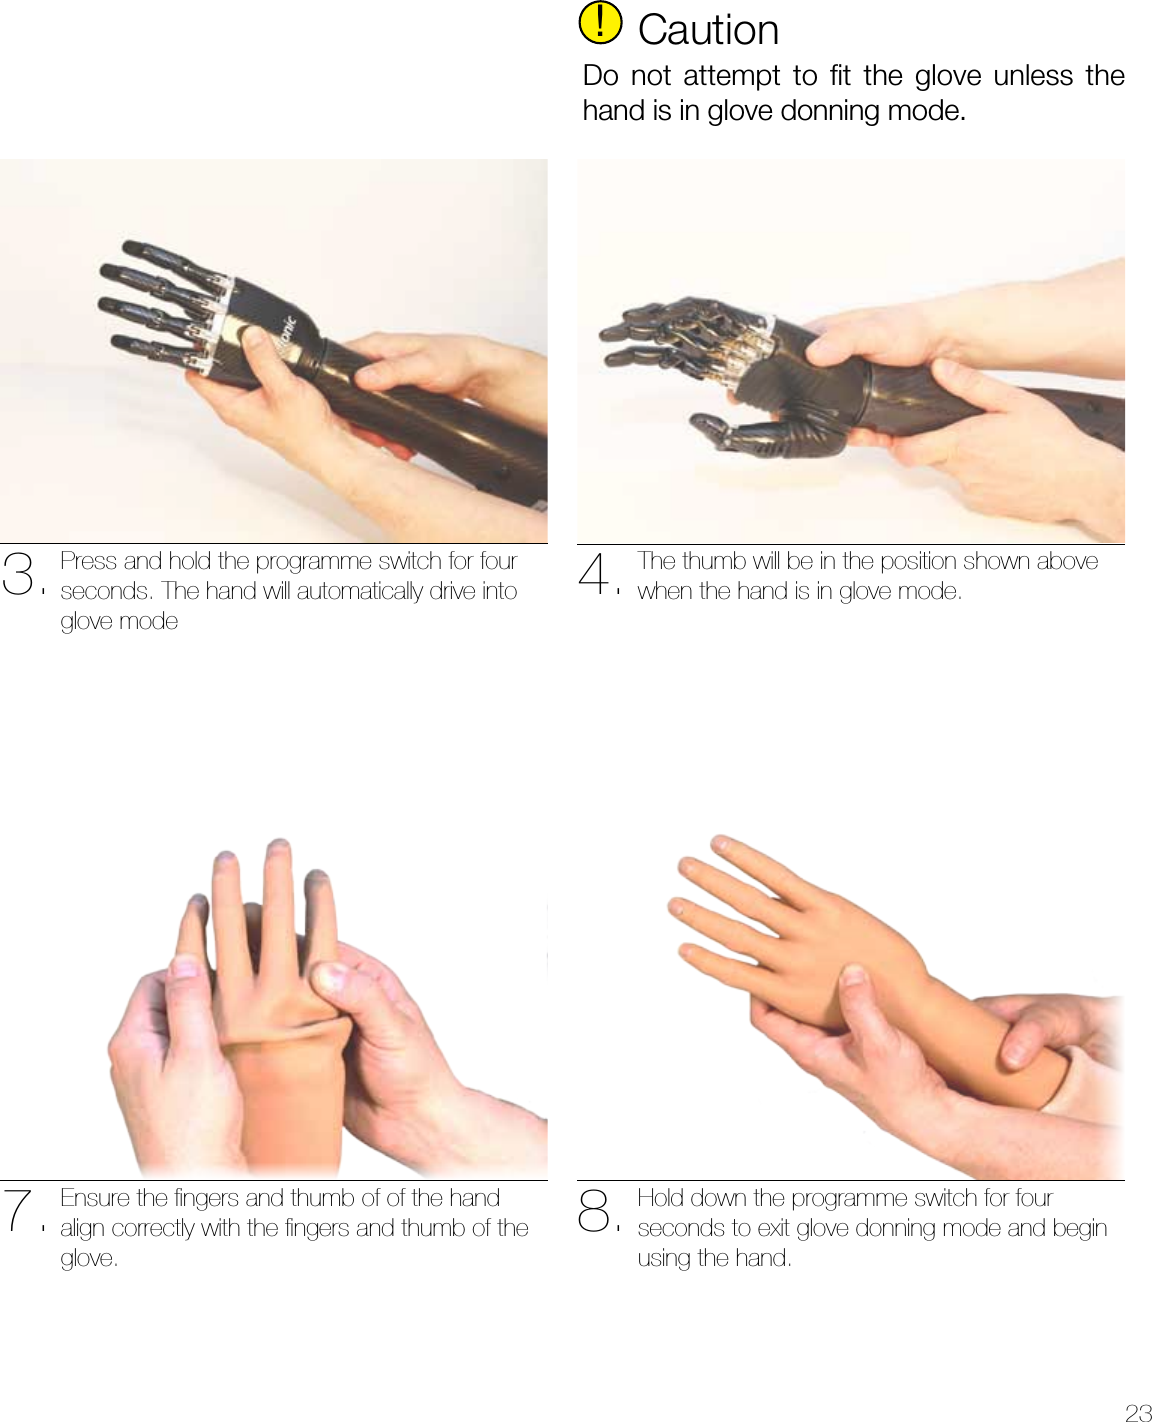 237. 8.Ensure the ﬁngers and thumb of of the hand align correctly with the ﬁngers and thumb of the glove.Hold down the programme switch for four seconds to exit glove donning mode and begin using the hand.3. 4.Press and hold the programme switch for four seconds. The hand will automatically drive into glove modeThe thumb will be in the position shown above when the hand is in glove mode.!CautionDo not attempt to ﬁt the glove unless the hand is in glove donning mode.